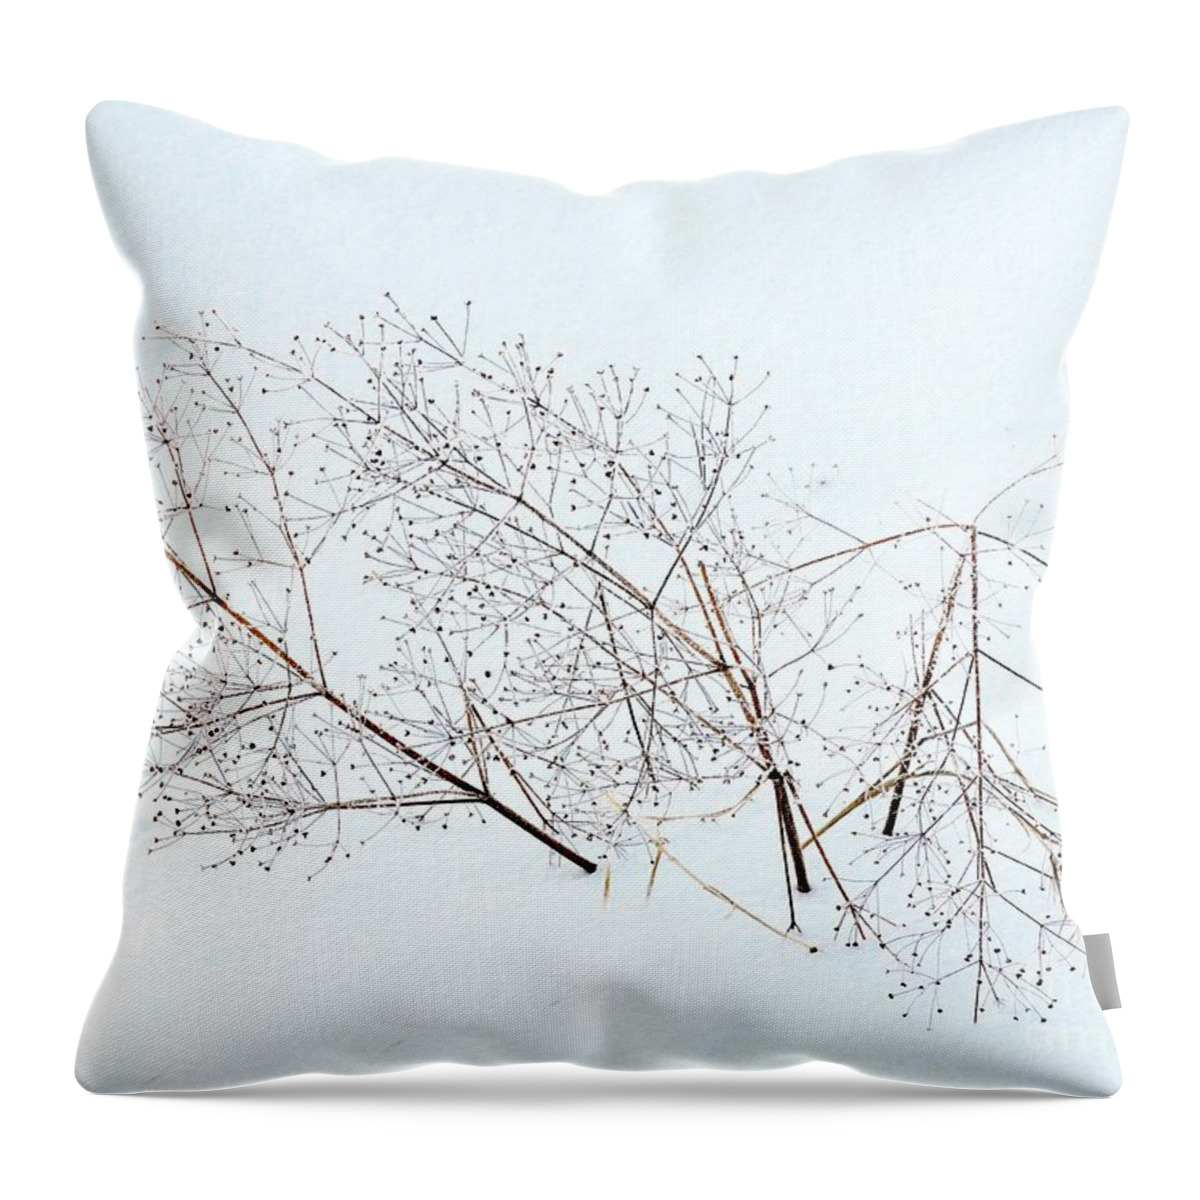 Nature Throw Pillow featuring the photograph Seeds On The Wind by Marcia Lee Jones